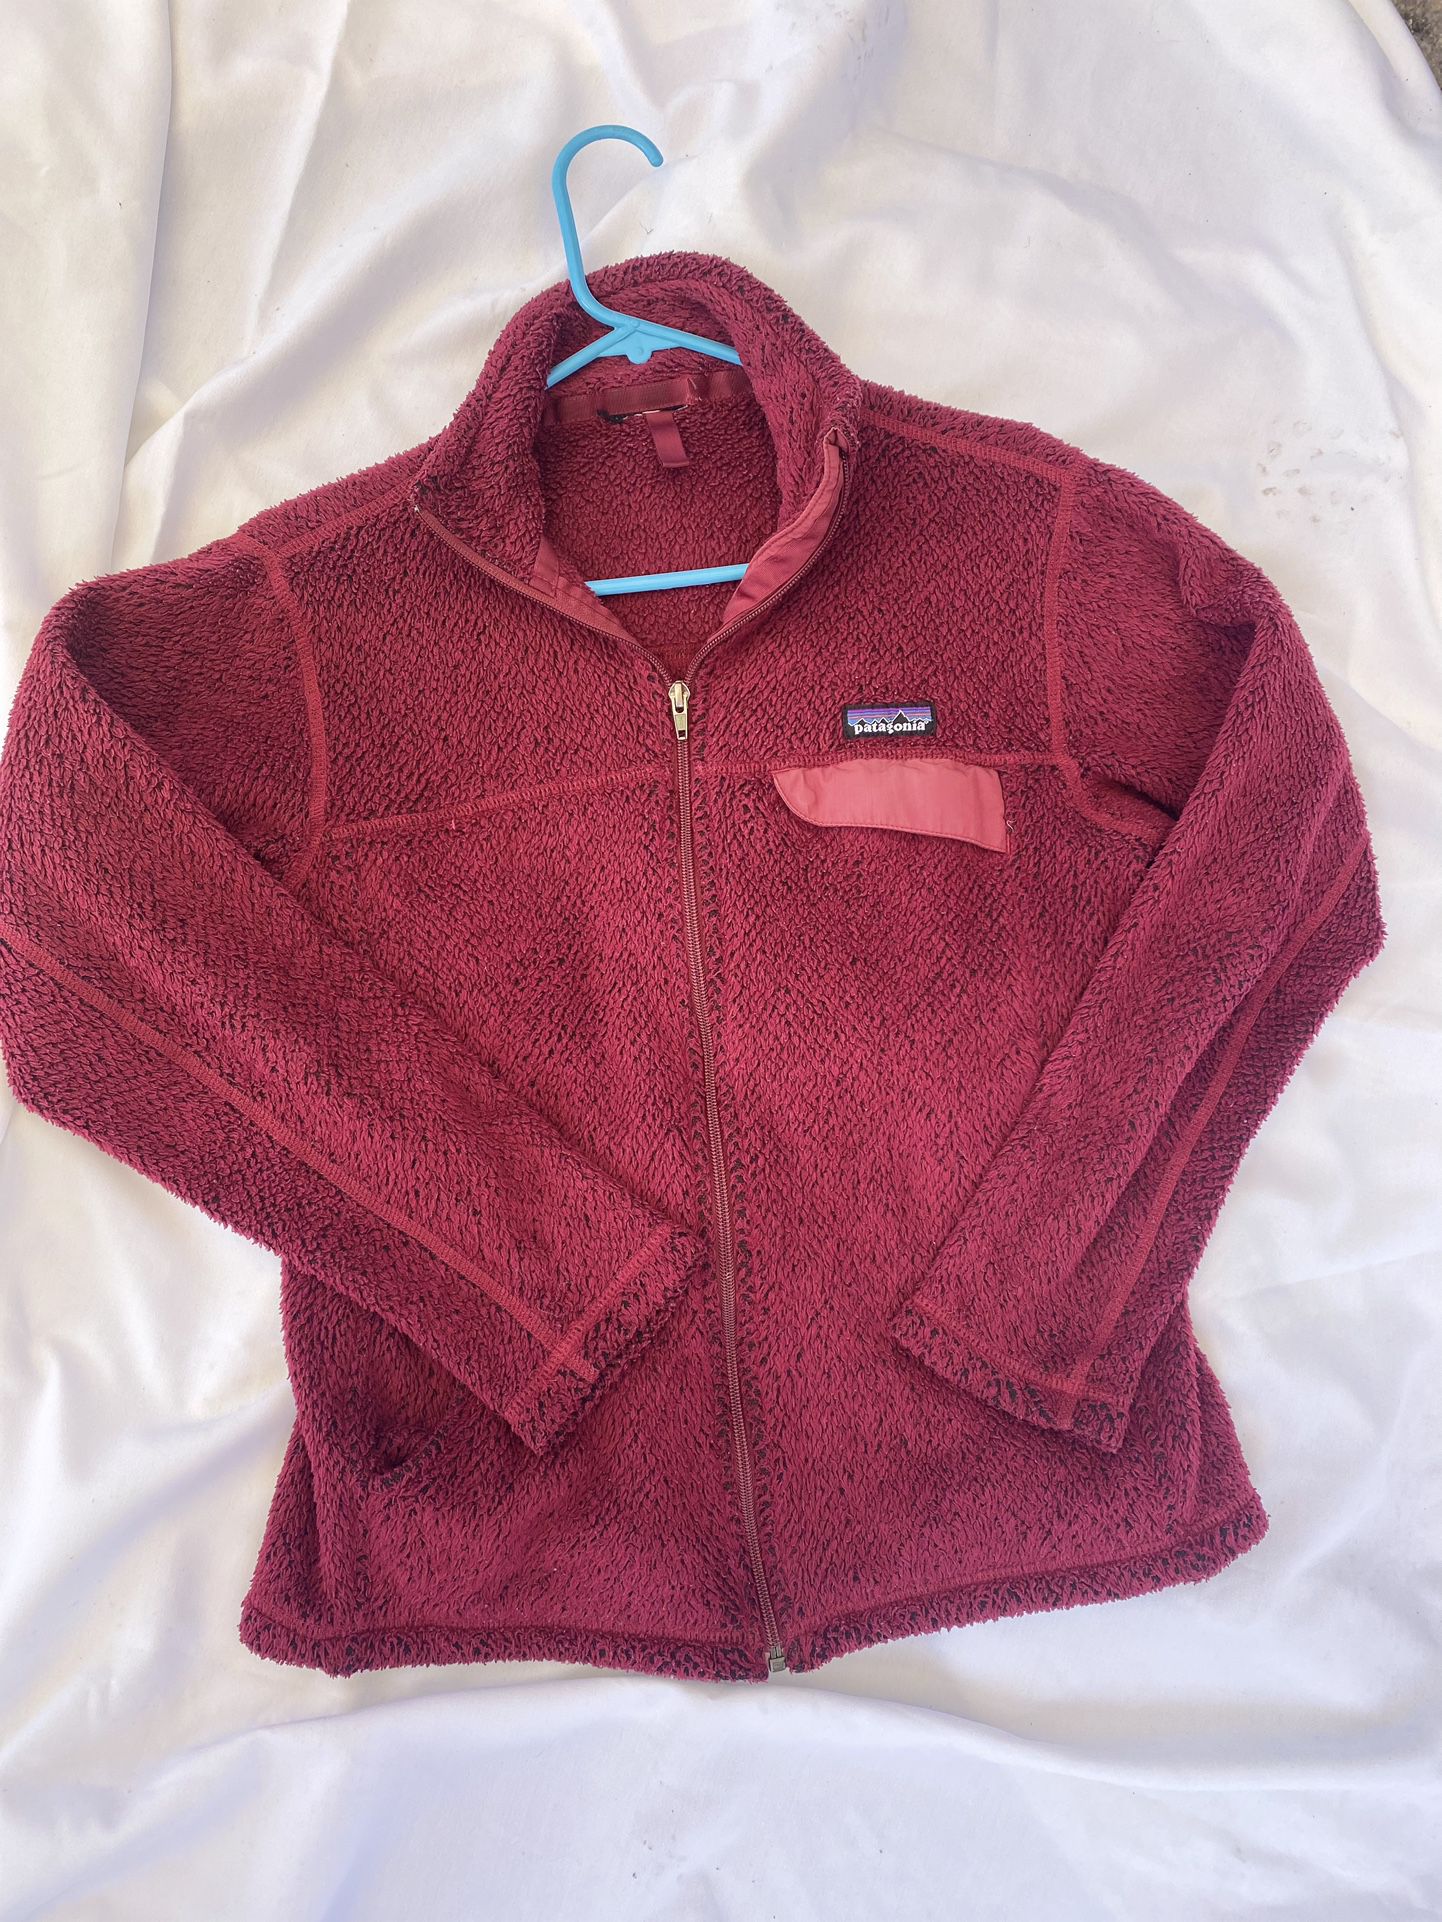 Patagonia De Mujer Size S.  &36 Each 